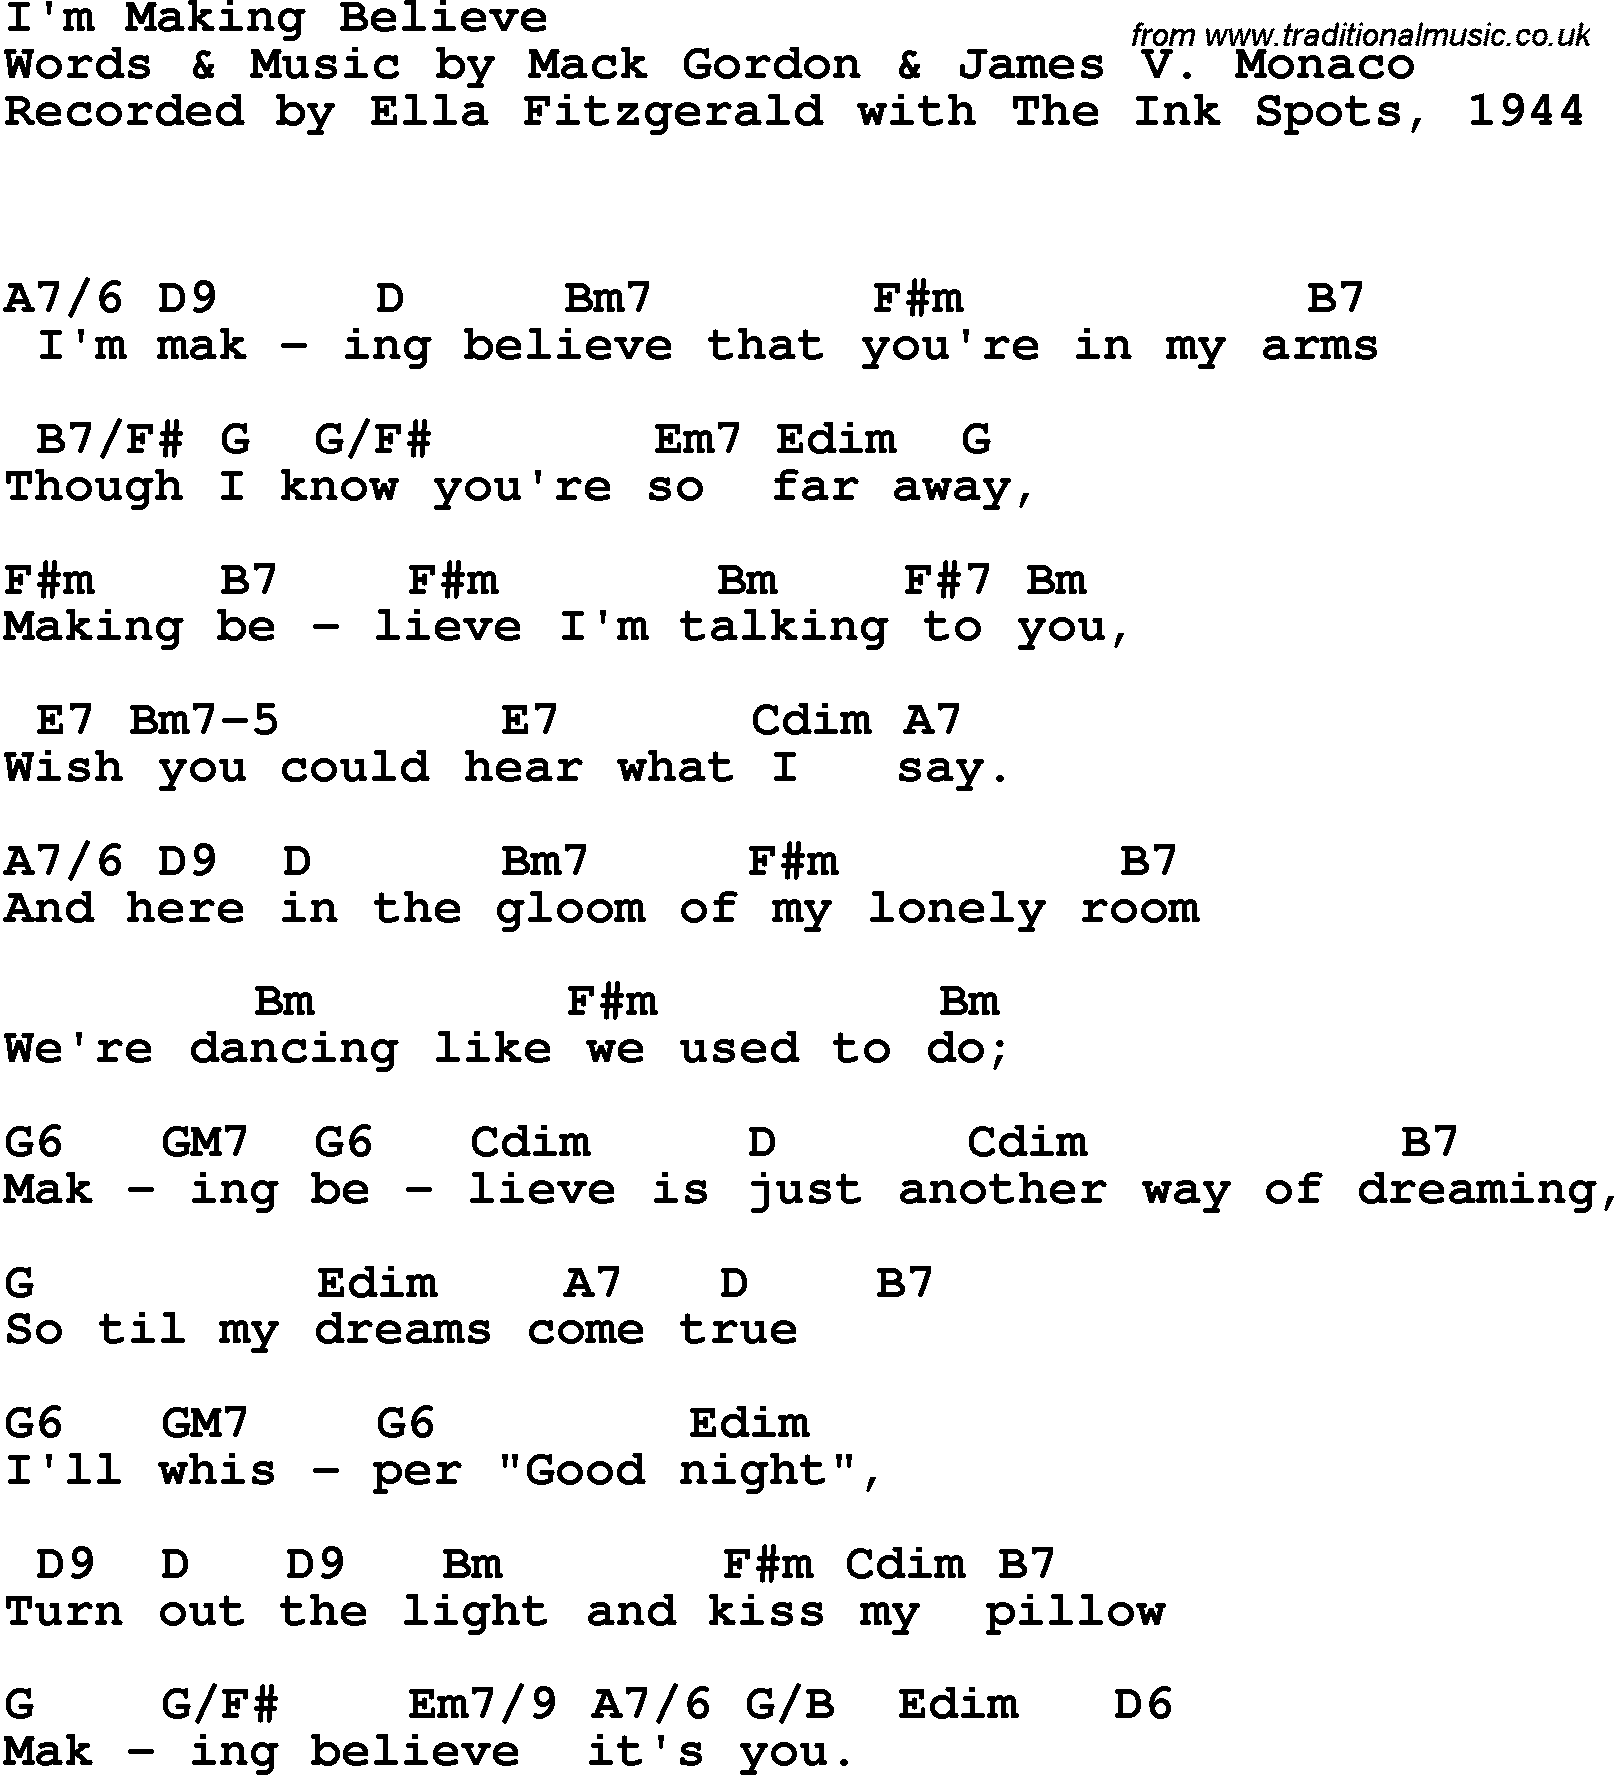 Song Lyrics with guitar chords for I'm Making Believe - Ella Fitzgerald With The Ink Spots, 1944